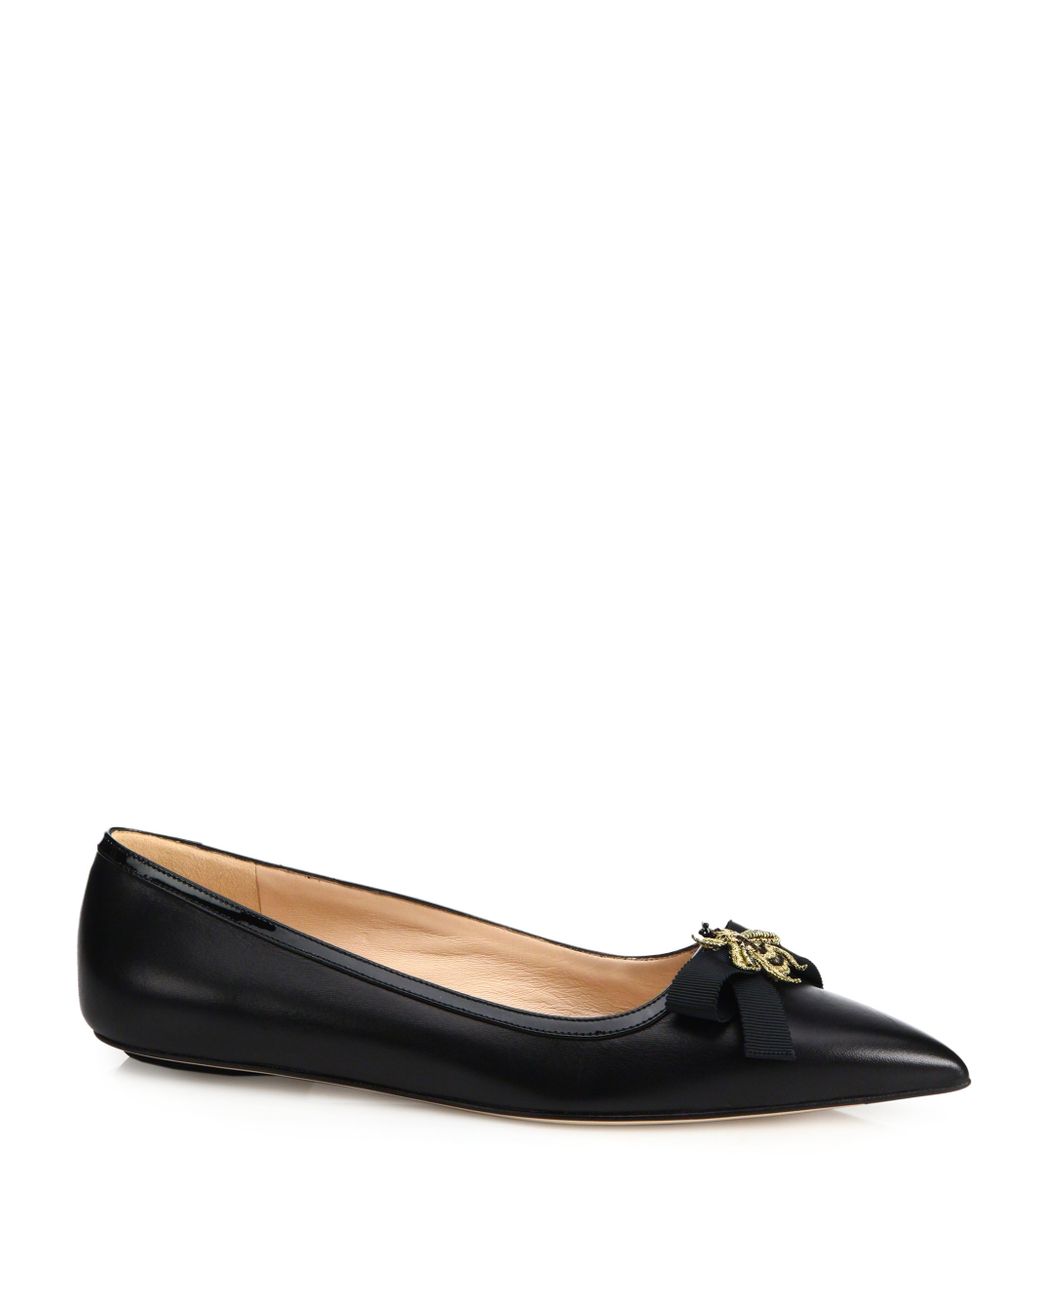 Gucci Moody Bee Leather Ballet Flats in Black | Lyst